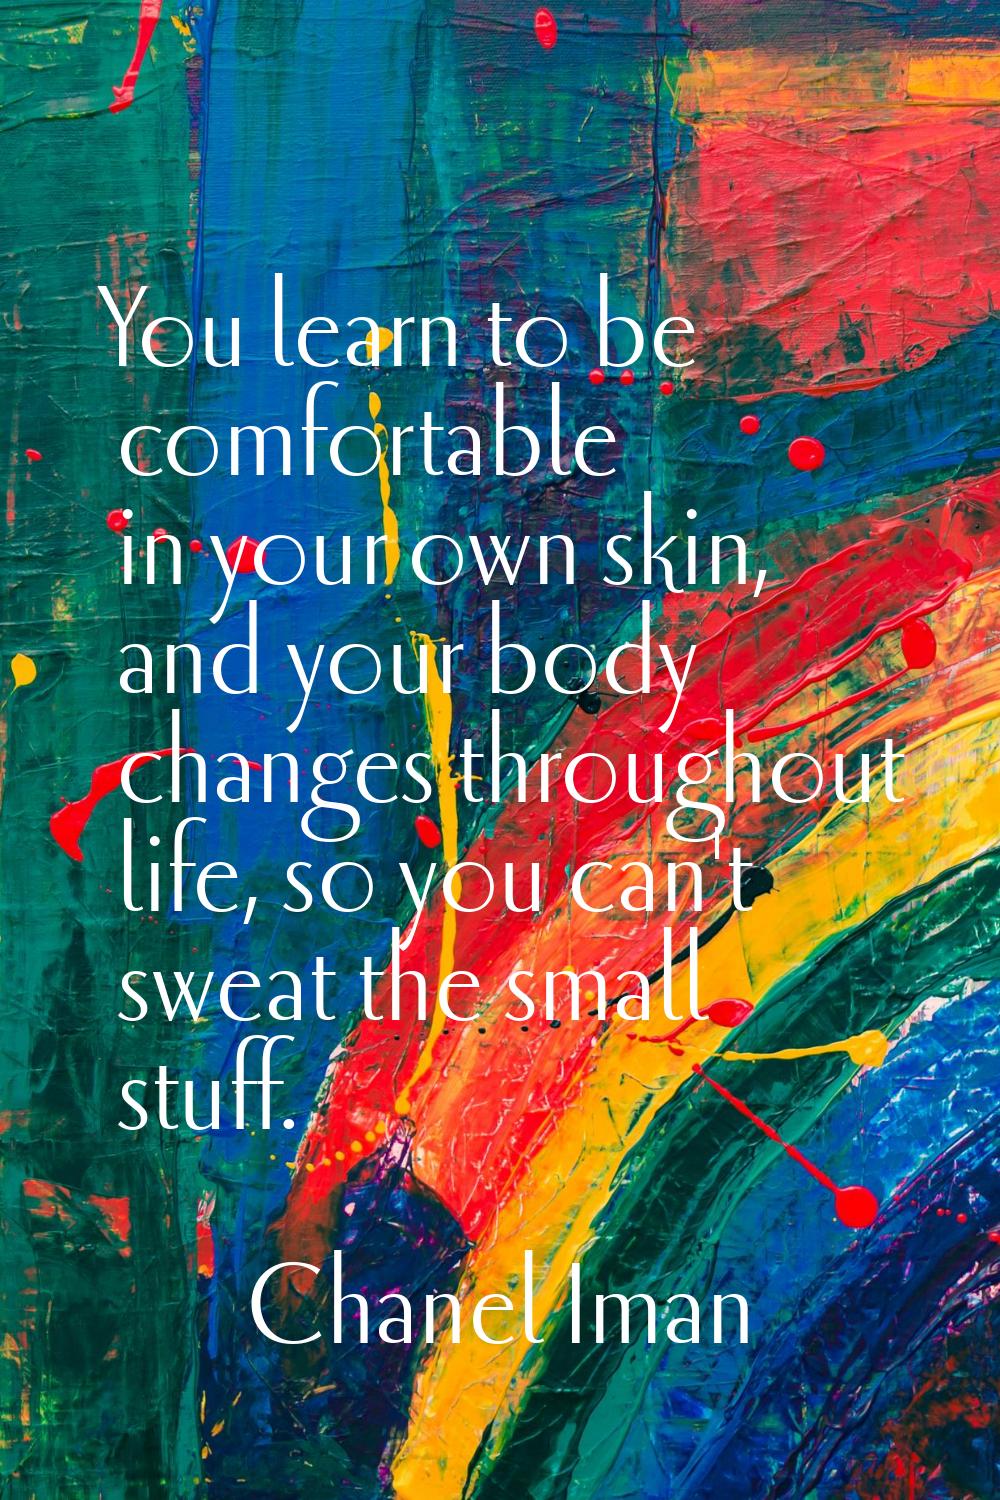 You learn to be comfortable in your own skin, and your body changes throughout life, so you can't s